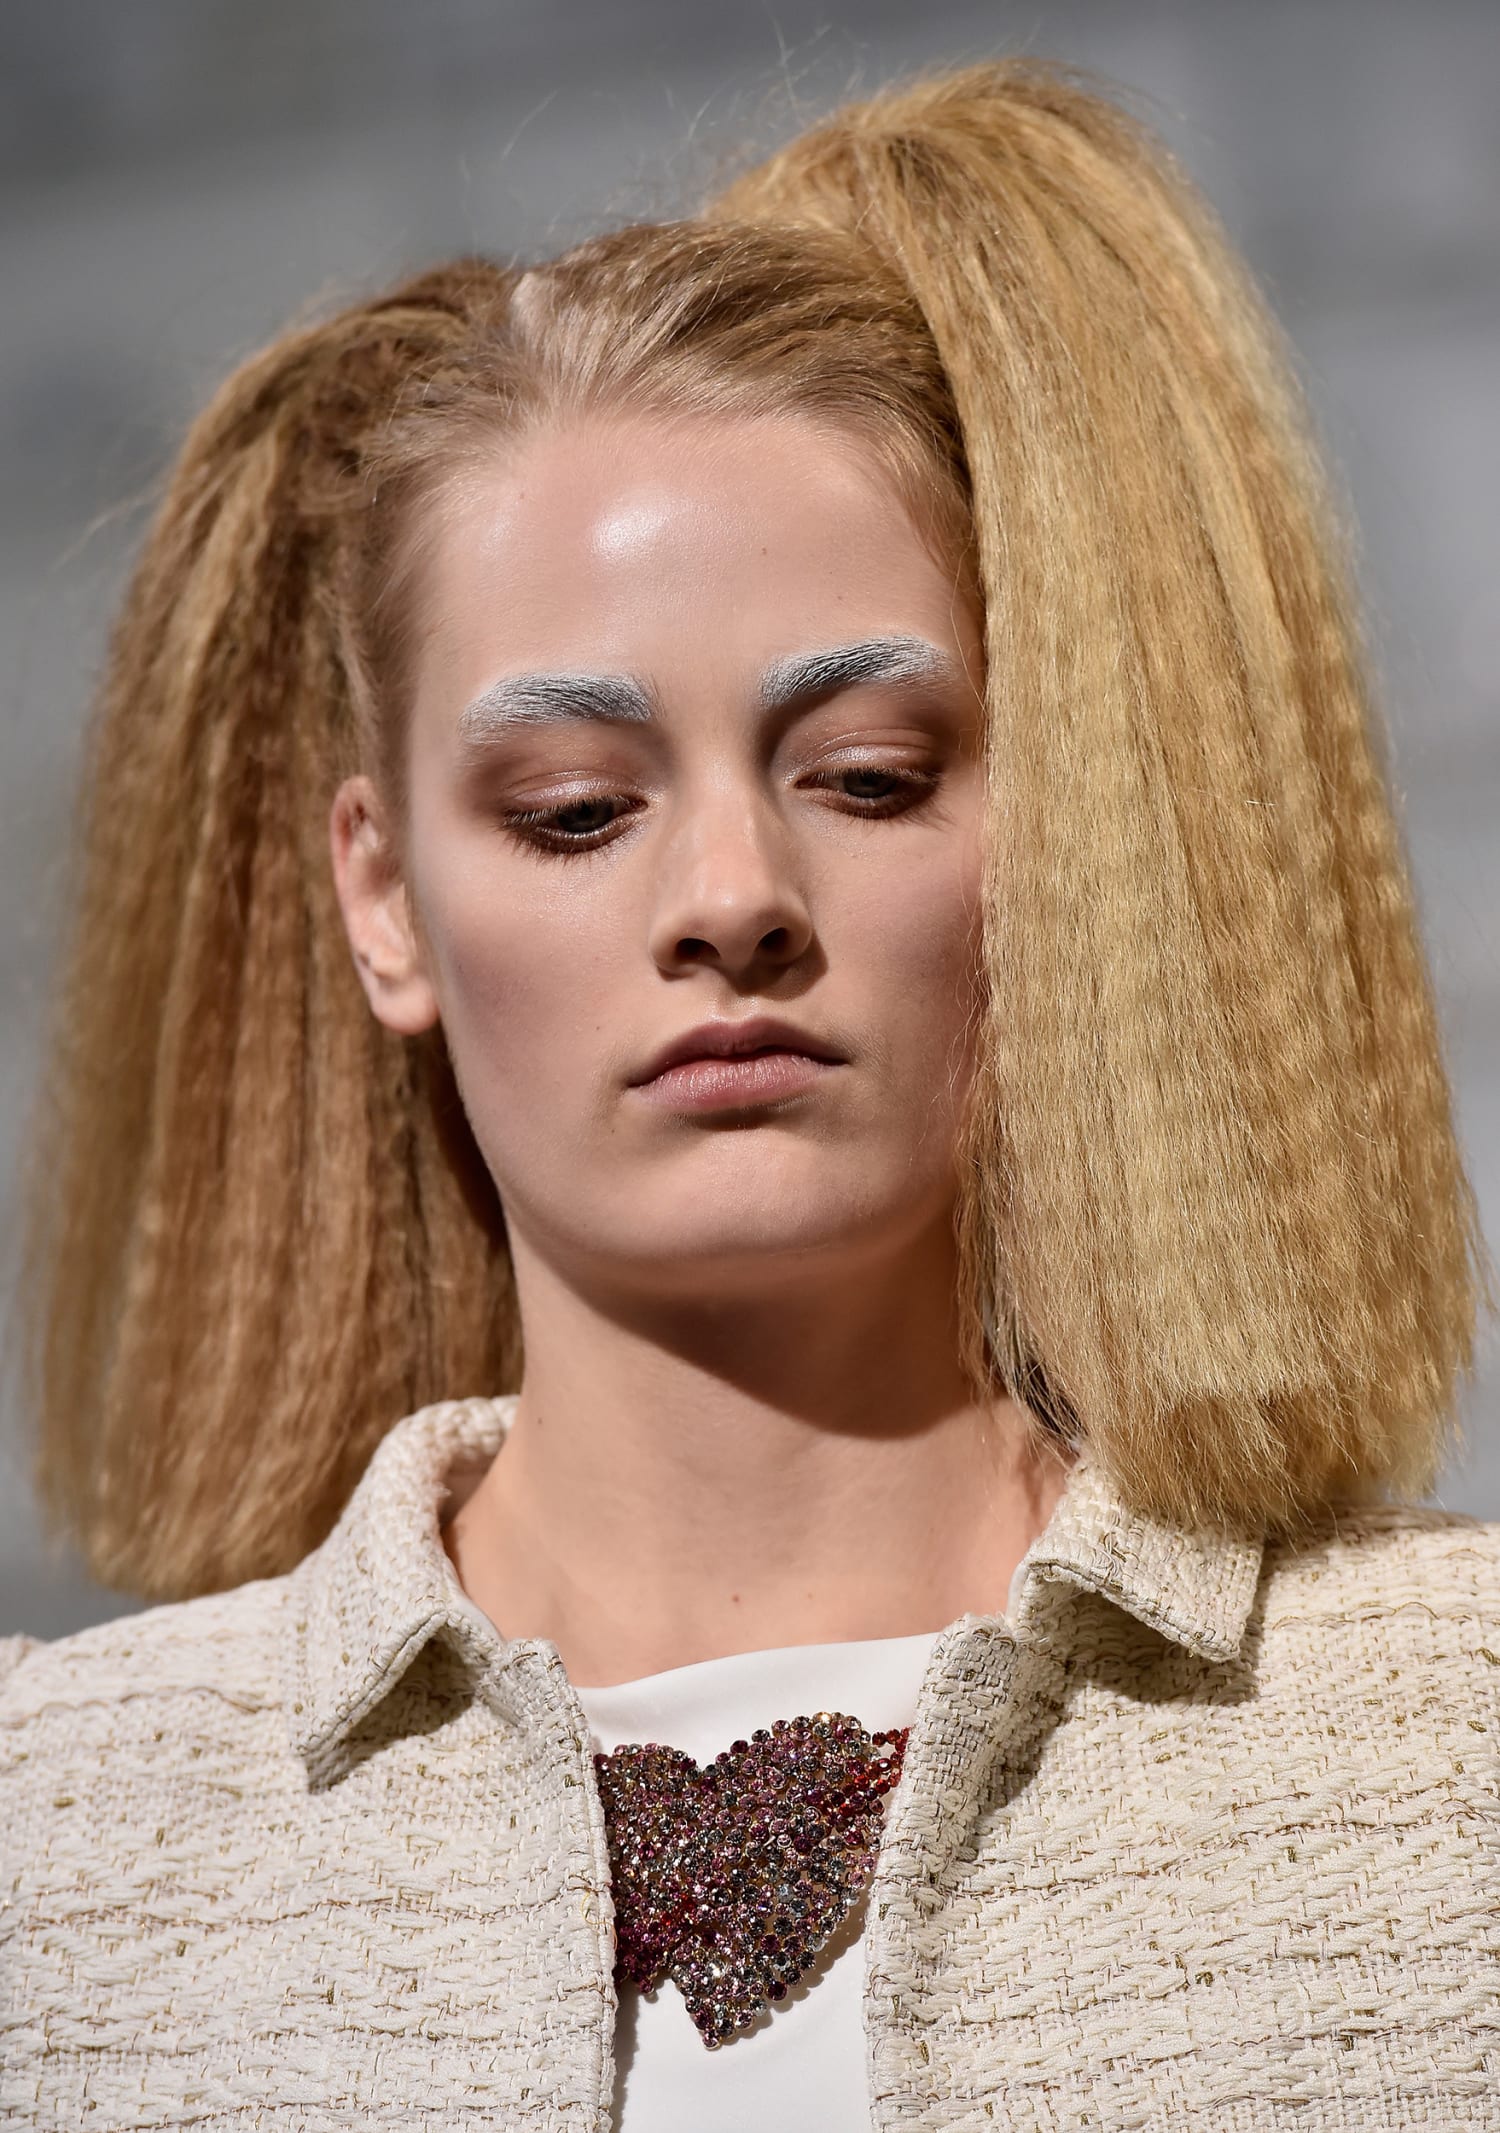 Crimped hair is making a comeback: See the look then and now